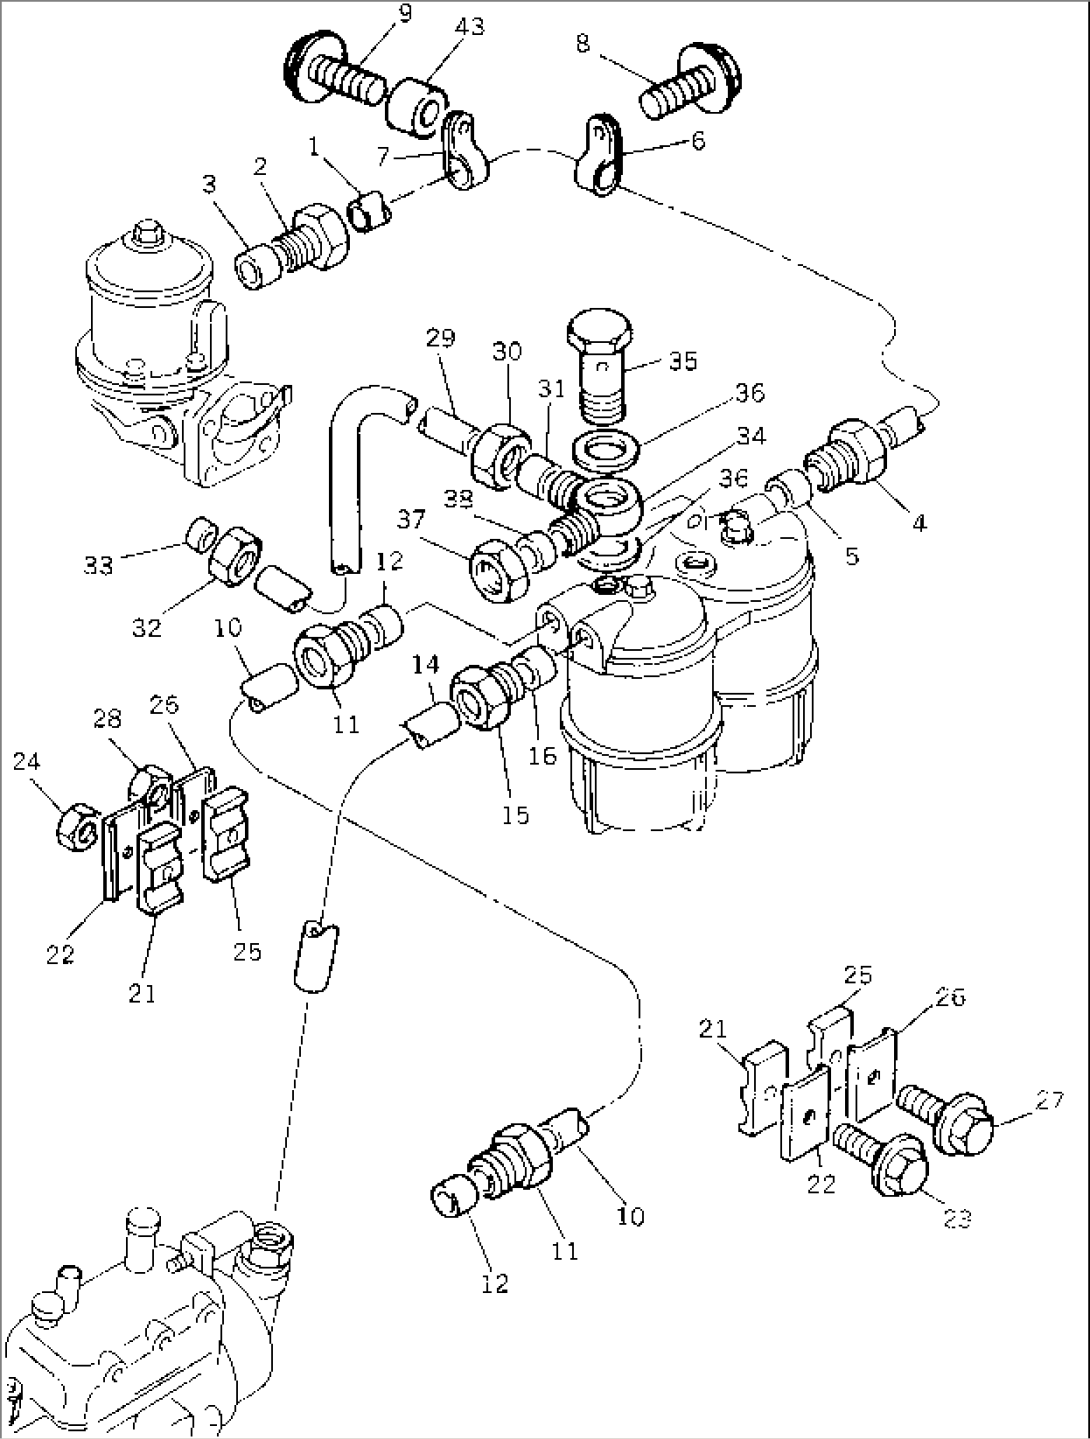 LOW PRESSURE FUEL SYSTEM